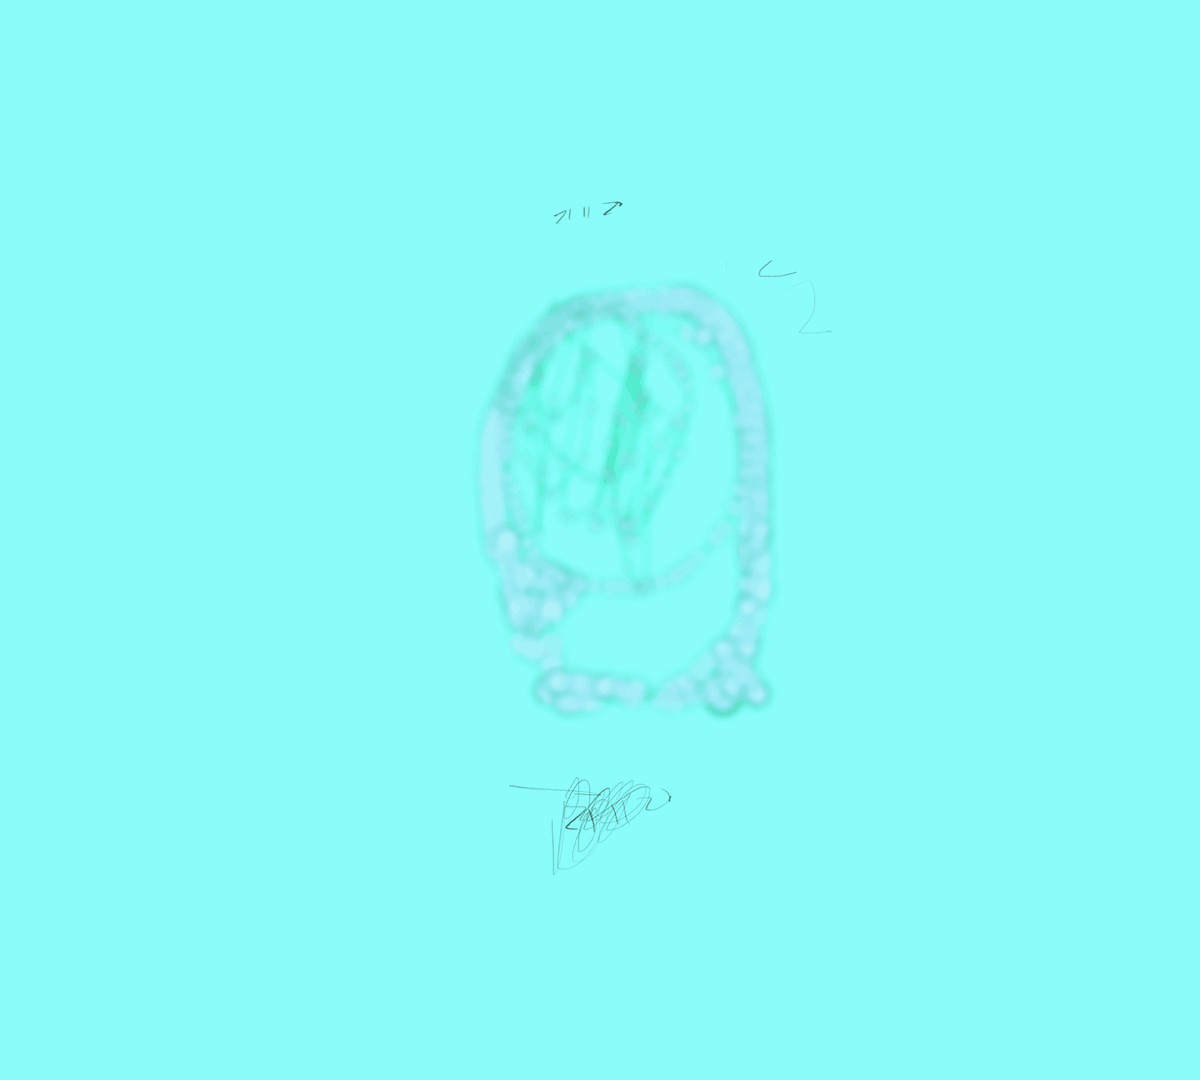 Blotchy browser painting in toothpaste stains on a mint background.